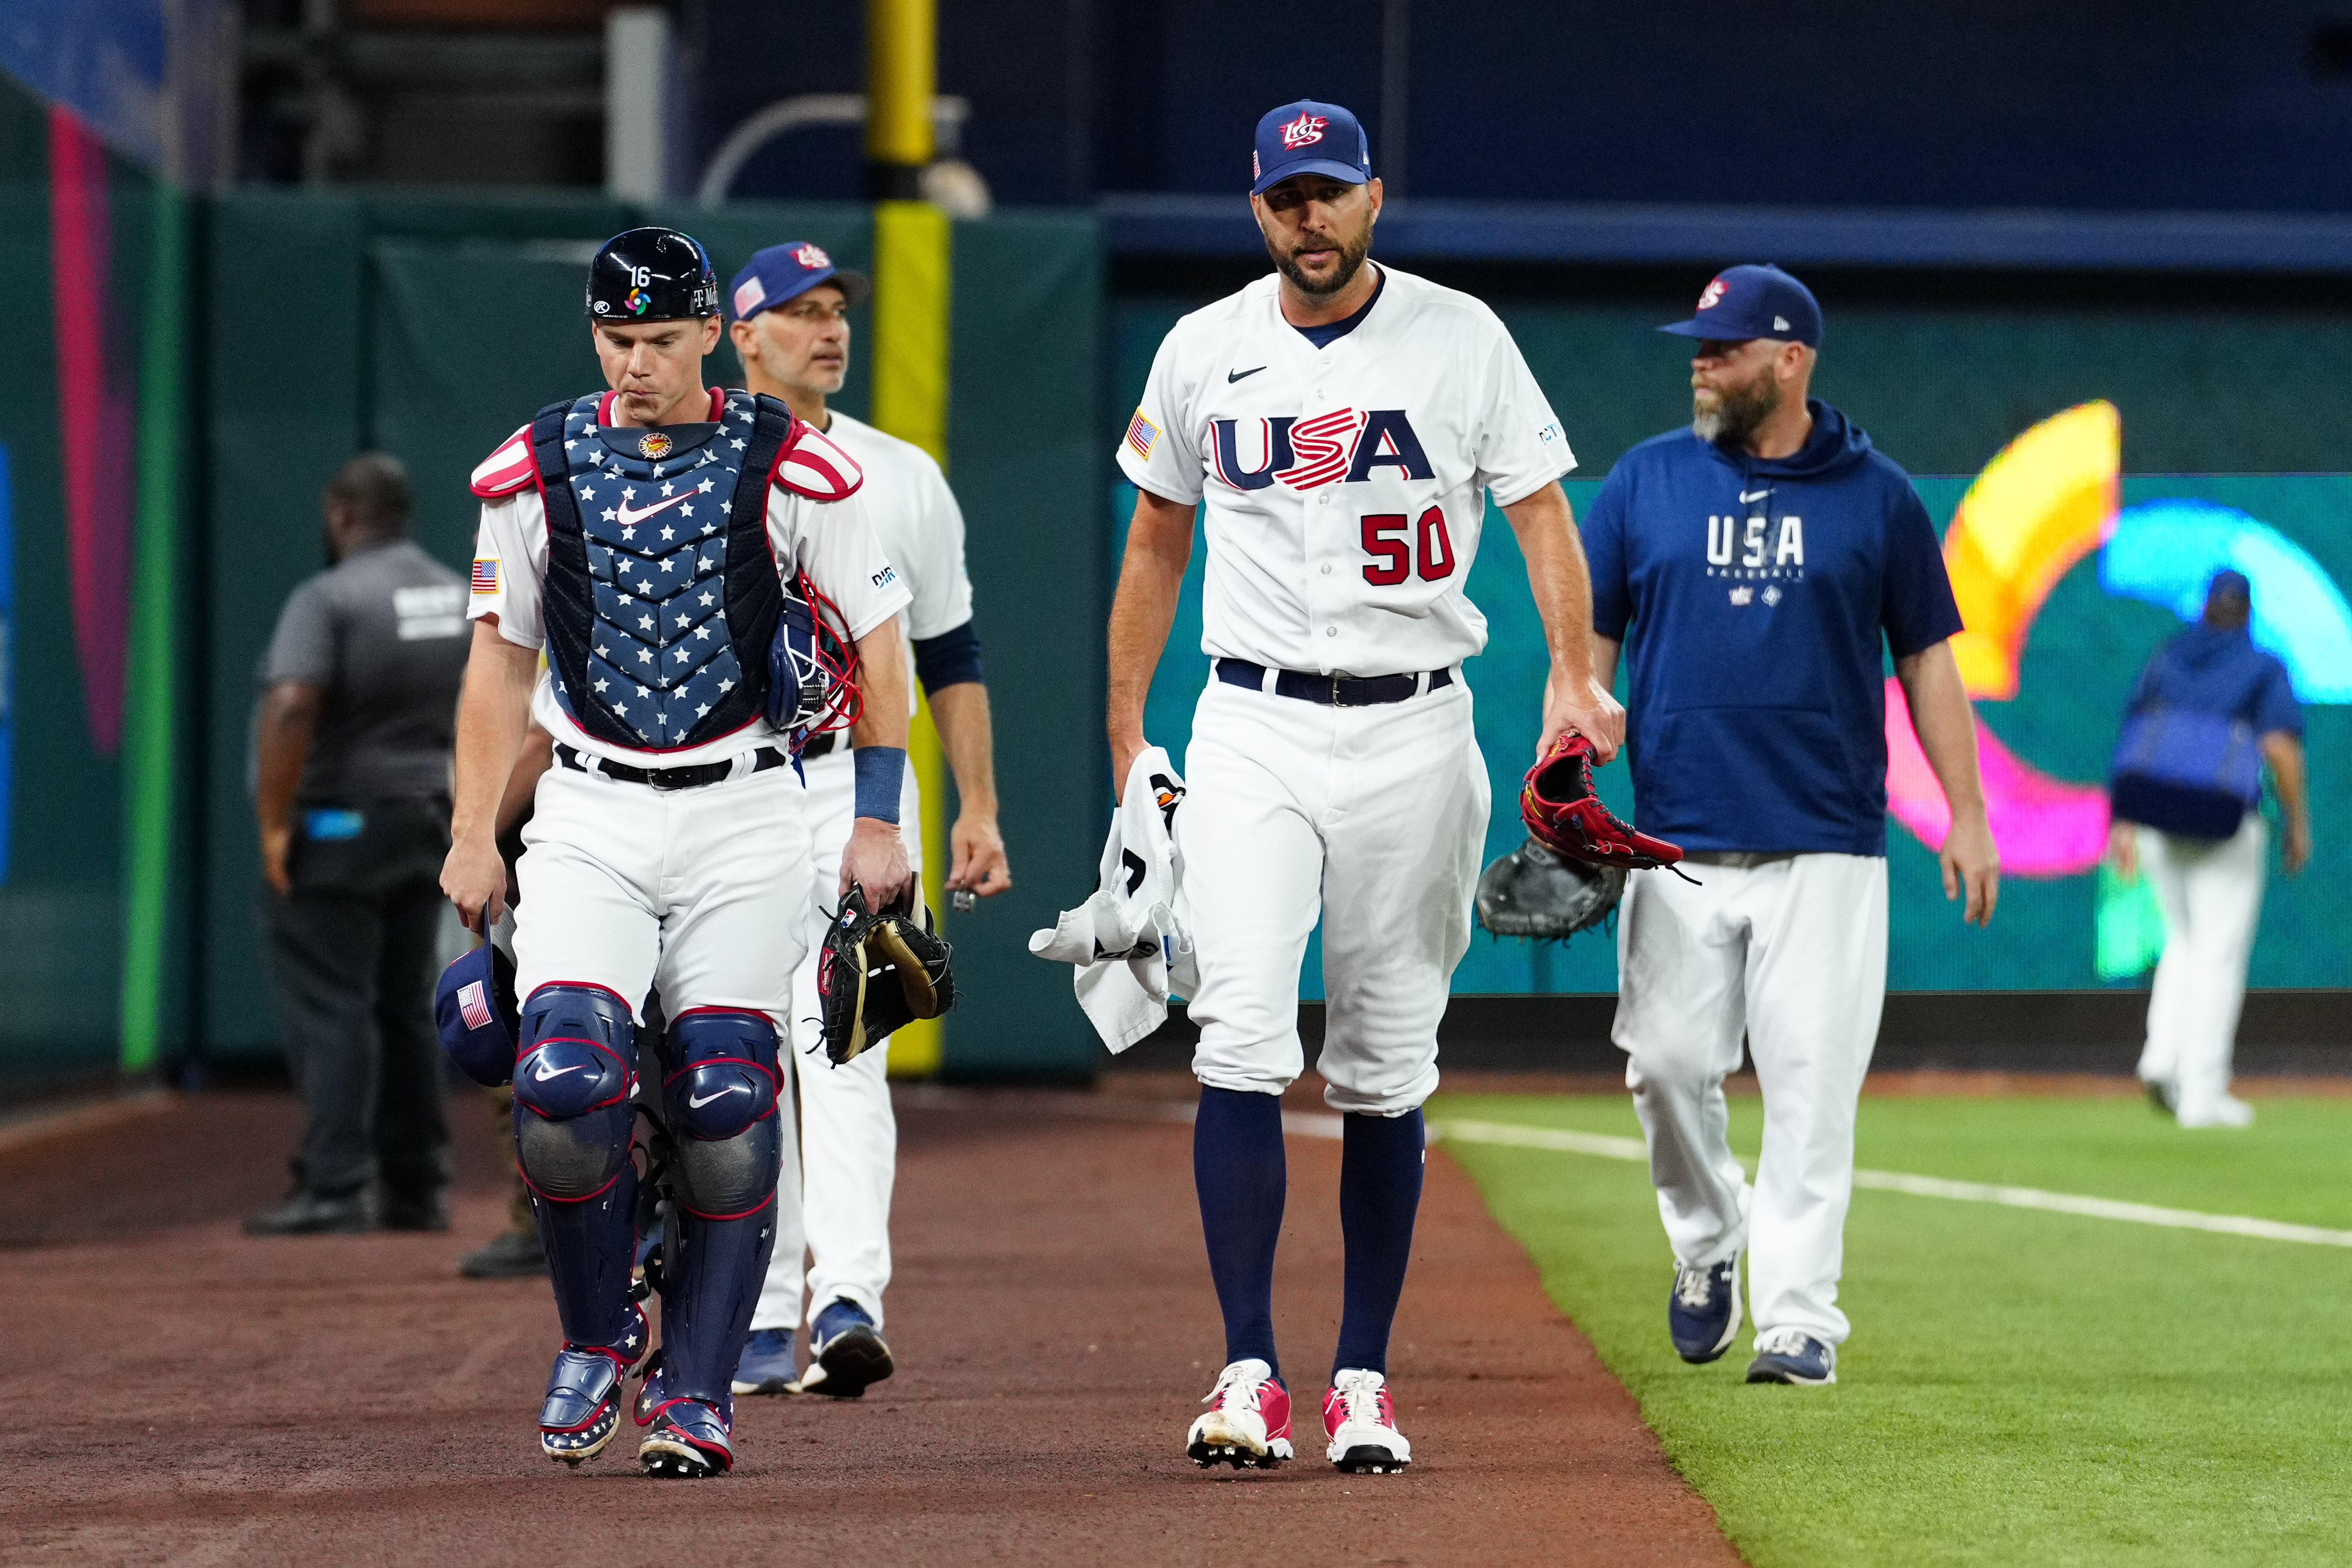 Will Smith #16 and Adam Wainwright #50 of Team USA take the field prior to the 2023 World Baseball Classic Semifinal game between Team Cuba and Team USA at loanDepot Park on Sunday, March 19, 2023 in Miami, Florida.